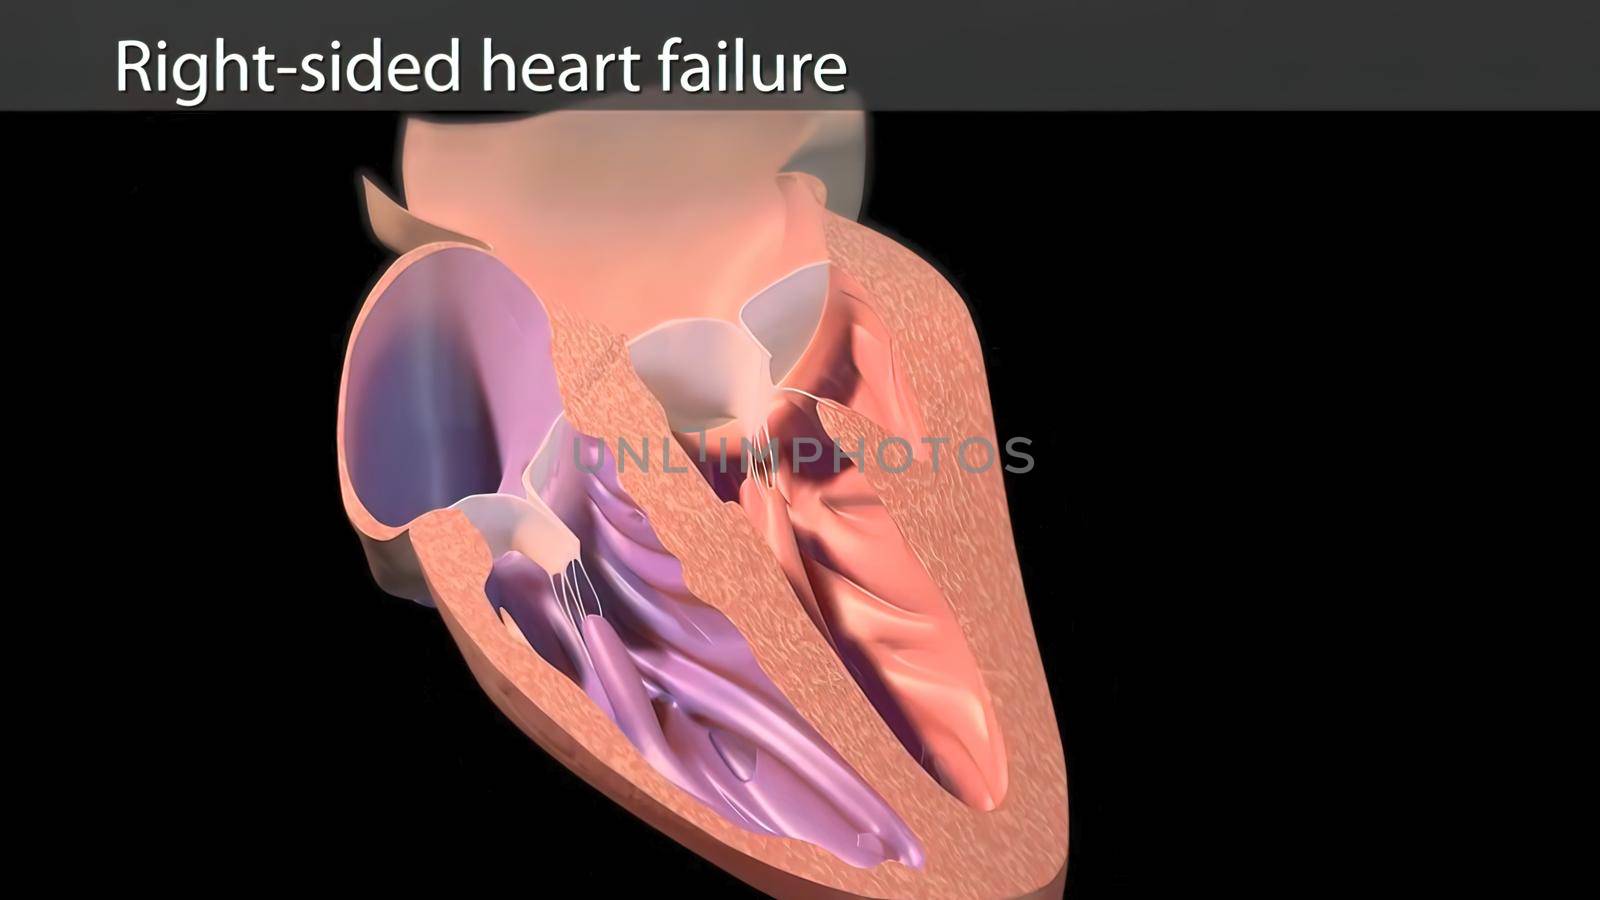 The right atrium receives blood from the veins and pumps it to the right ventricle. 3D illustration